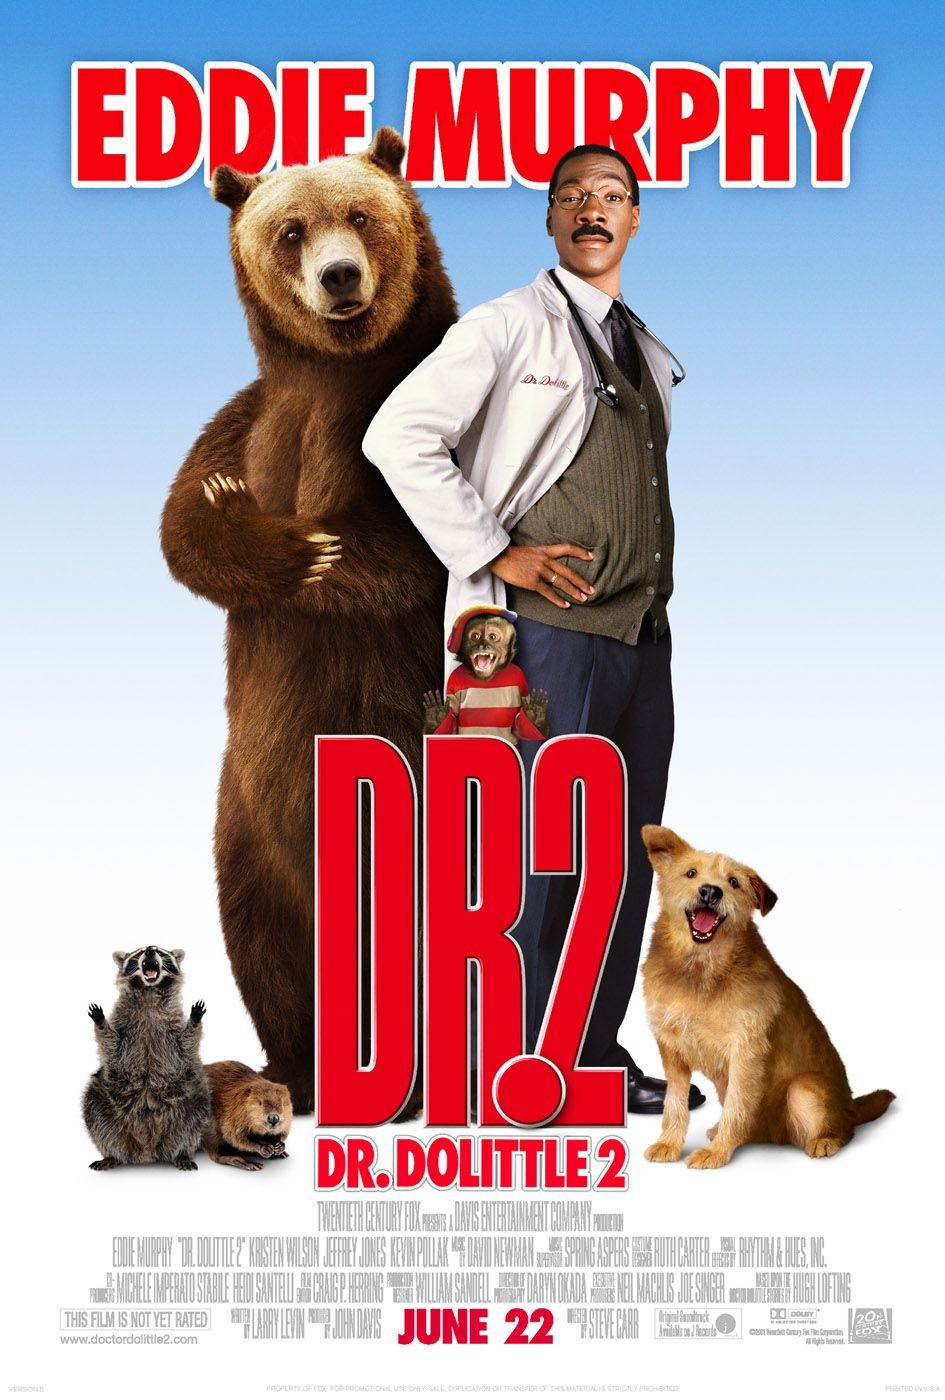 Poster of the movie Dr. Dolittle 2